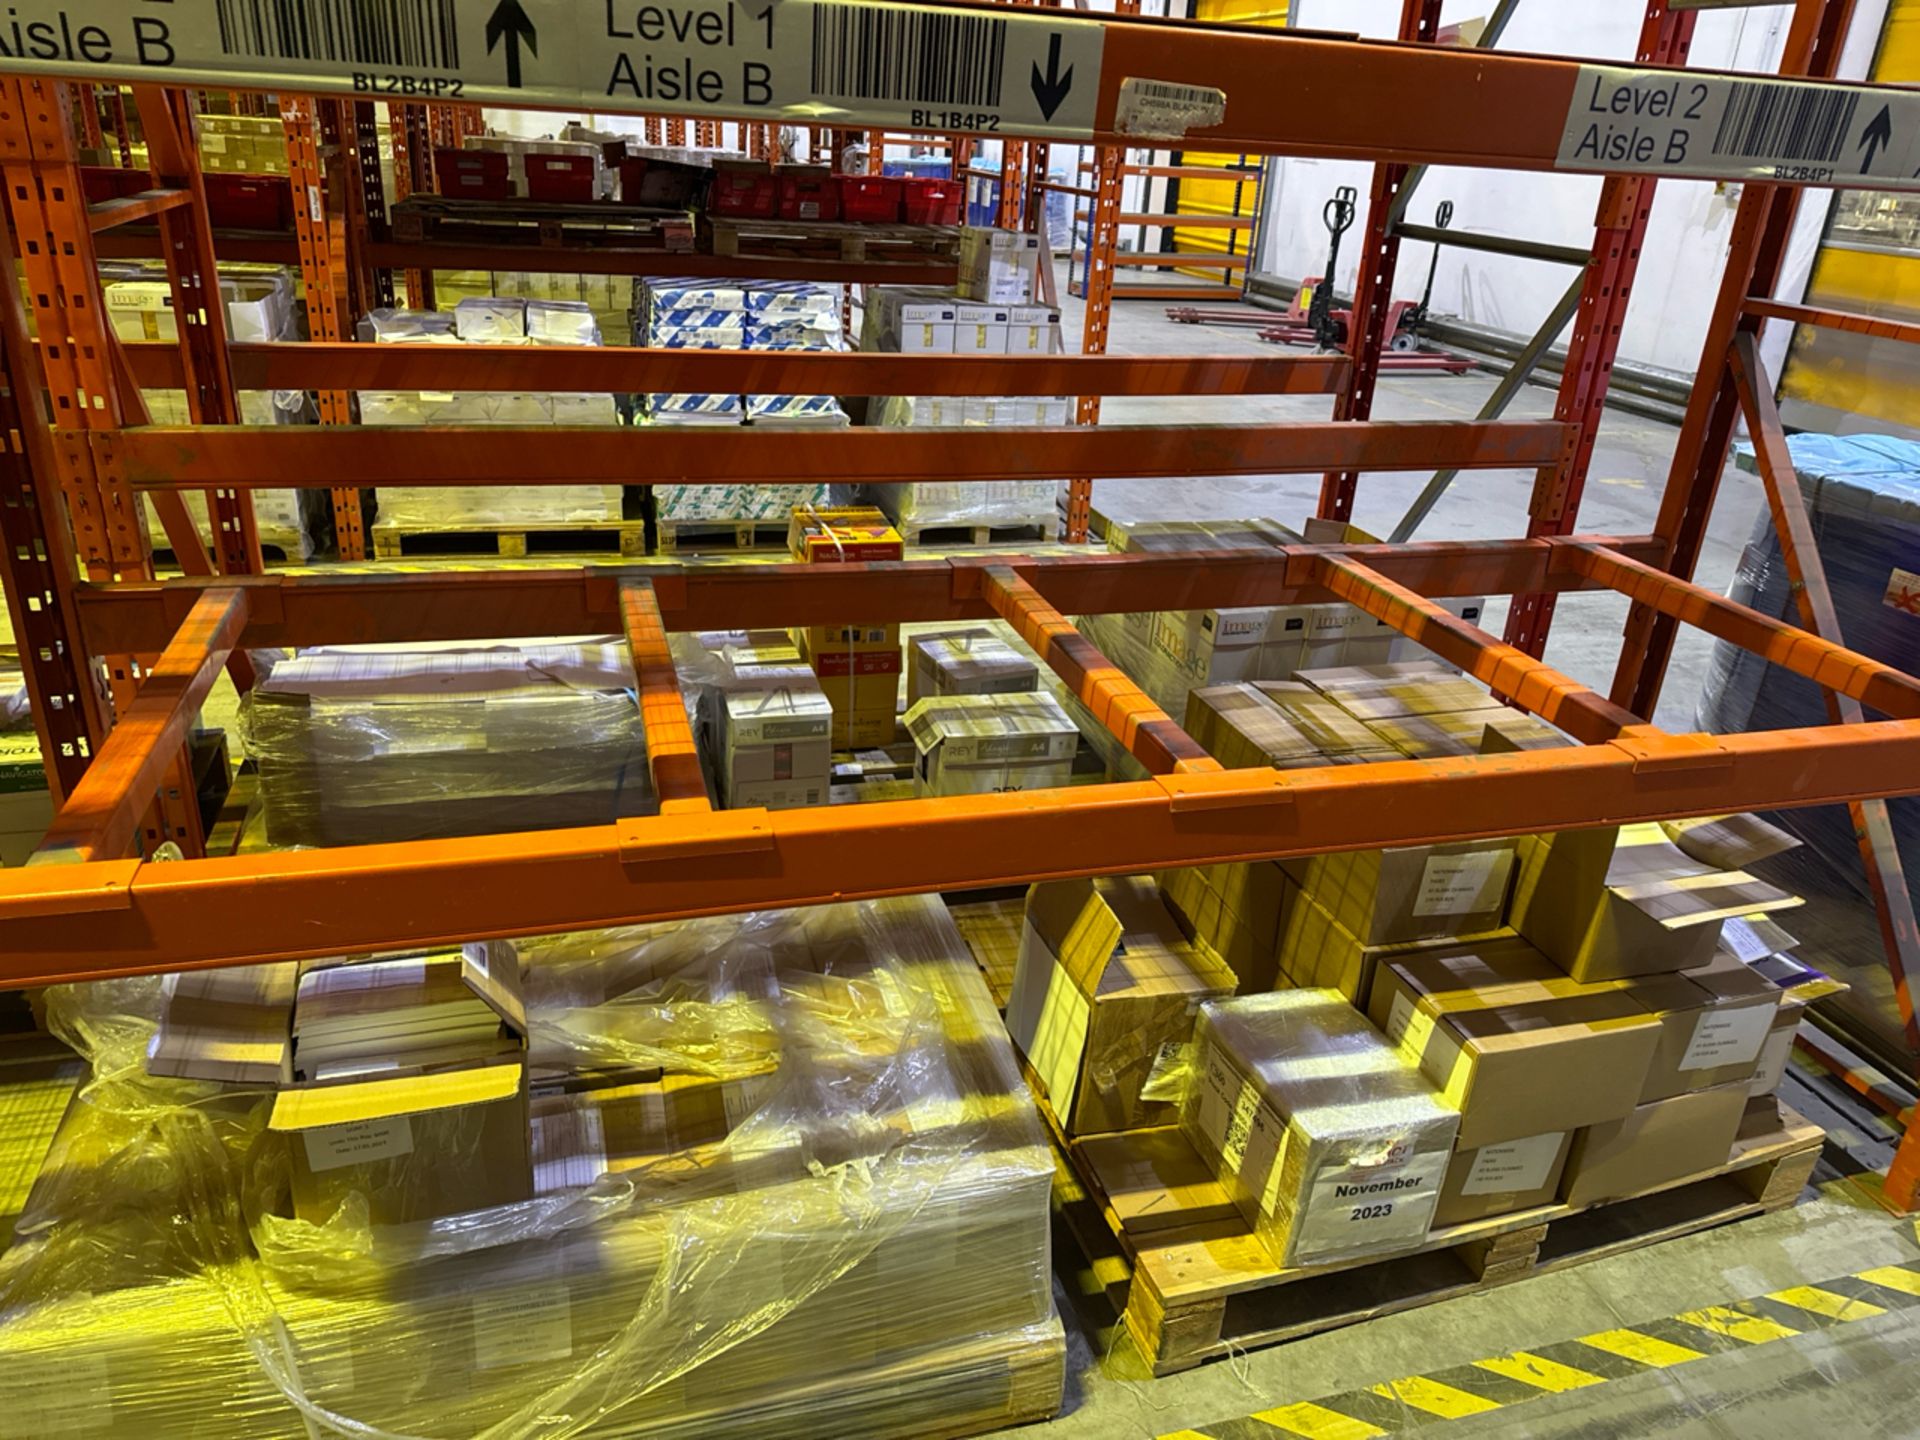 11 Bays Of Boltless Pallet Racking - Image 10 of 11